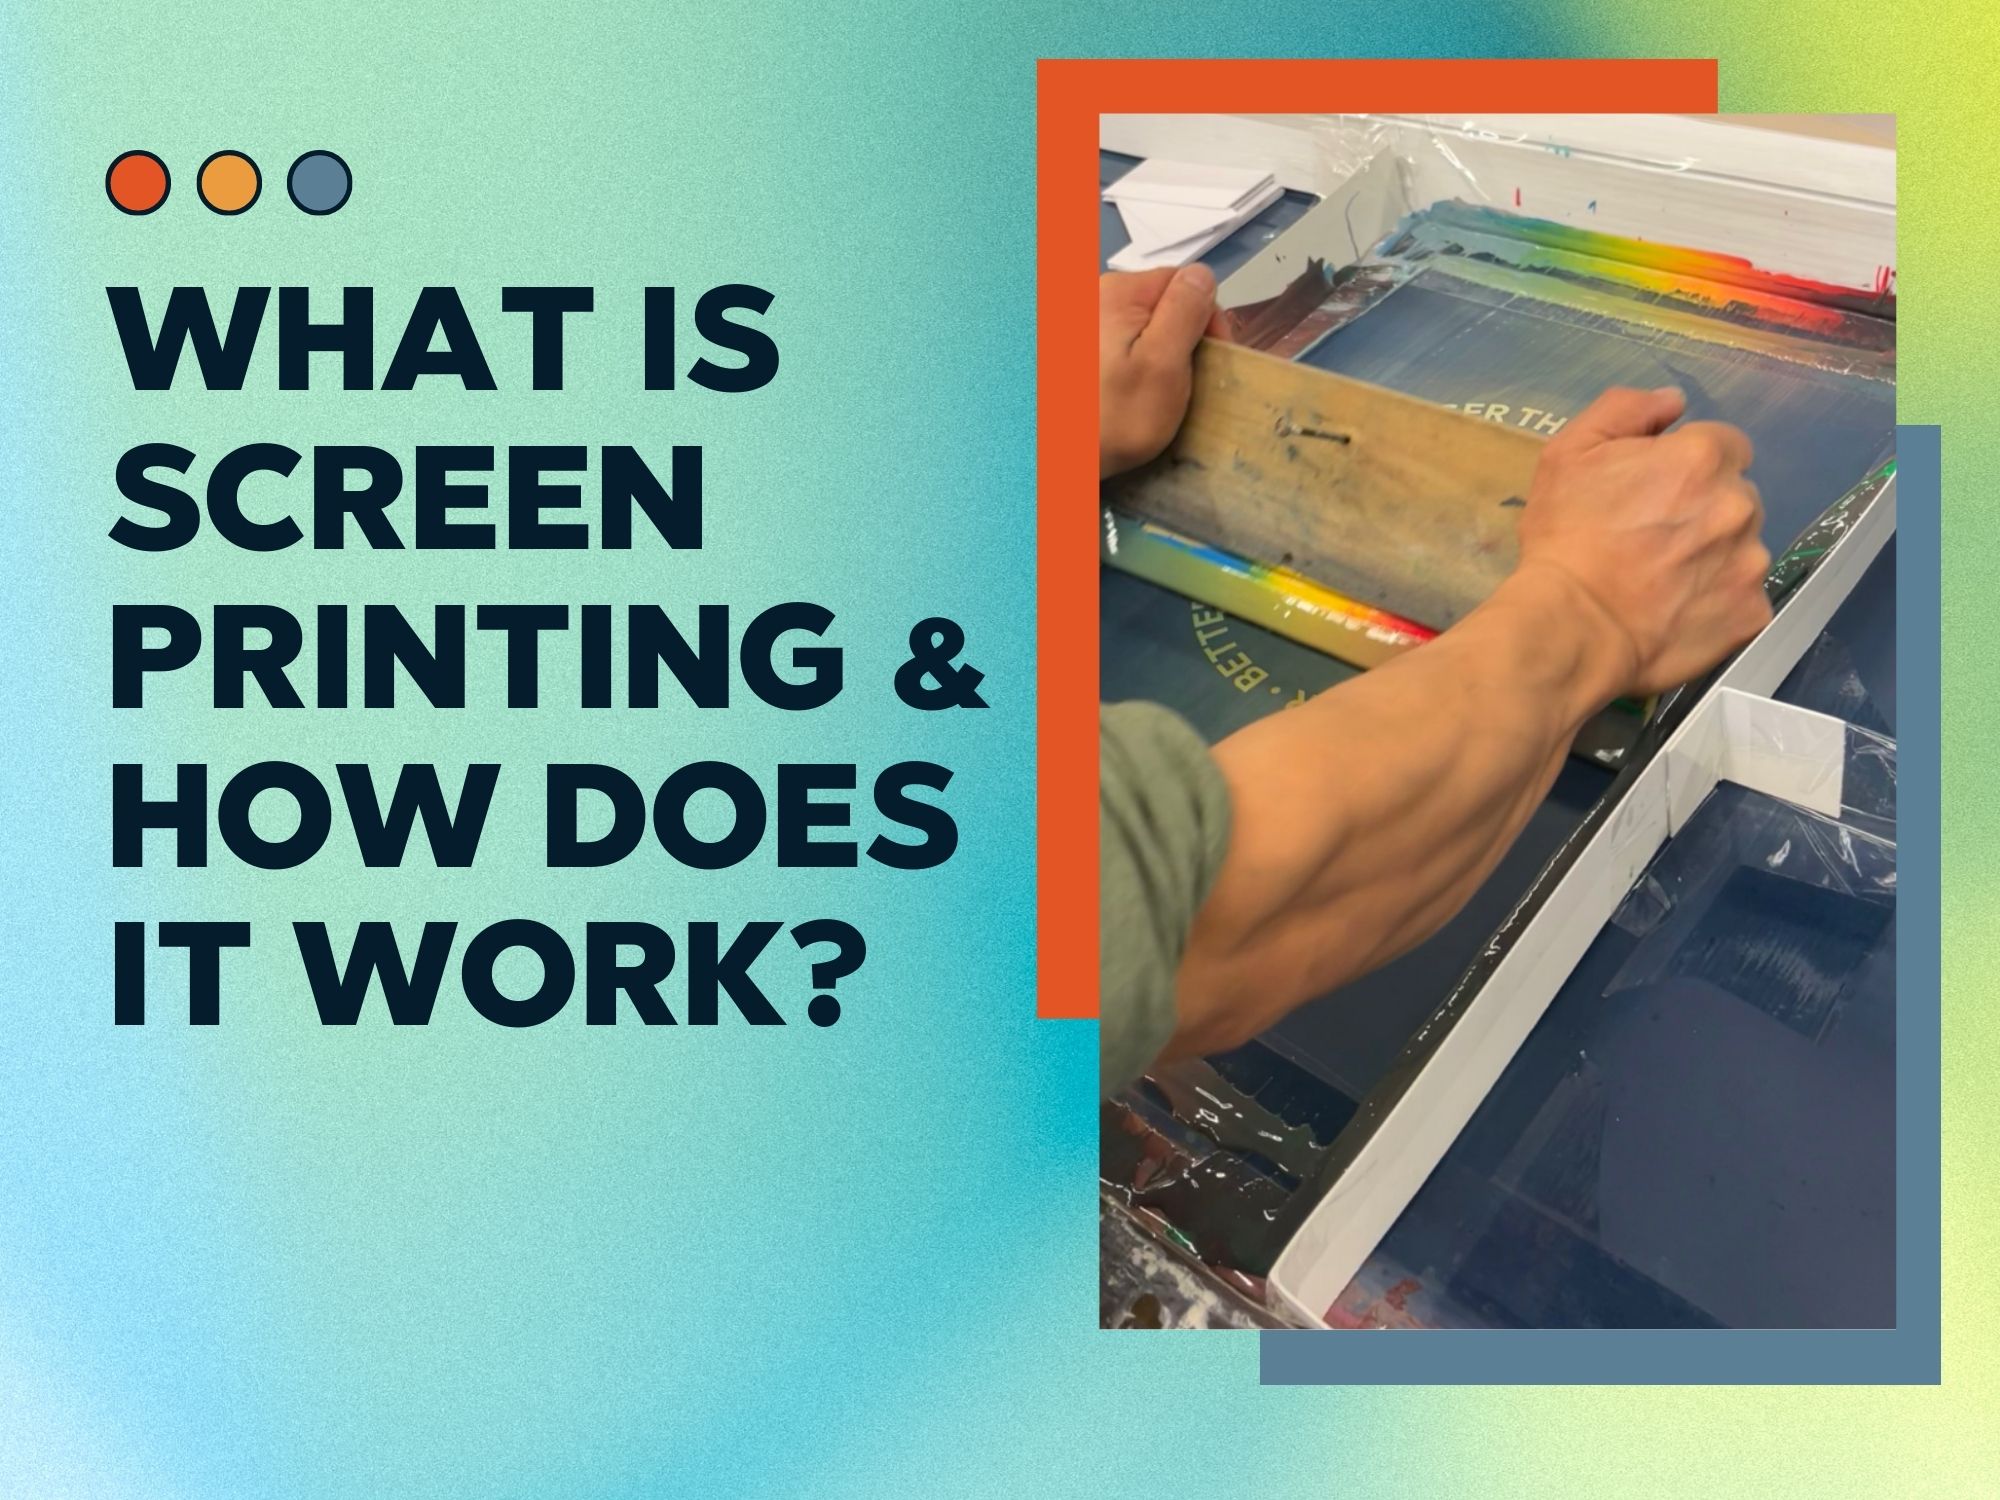 what-is-screen-printing-and-how-does-it-work-the-process-explained